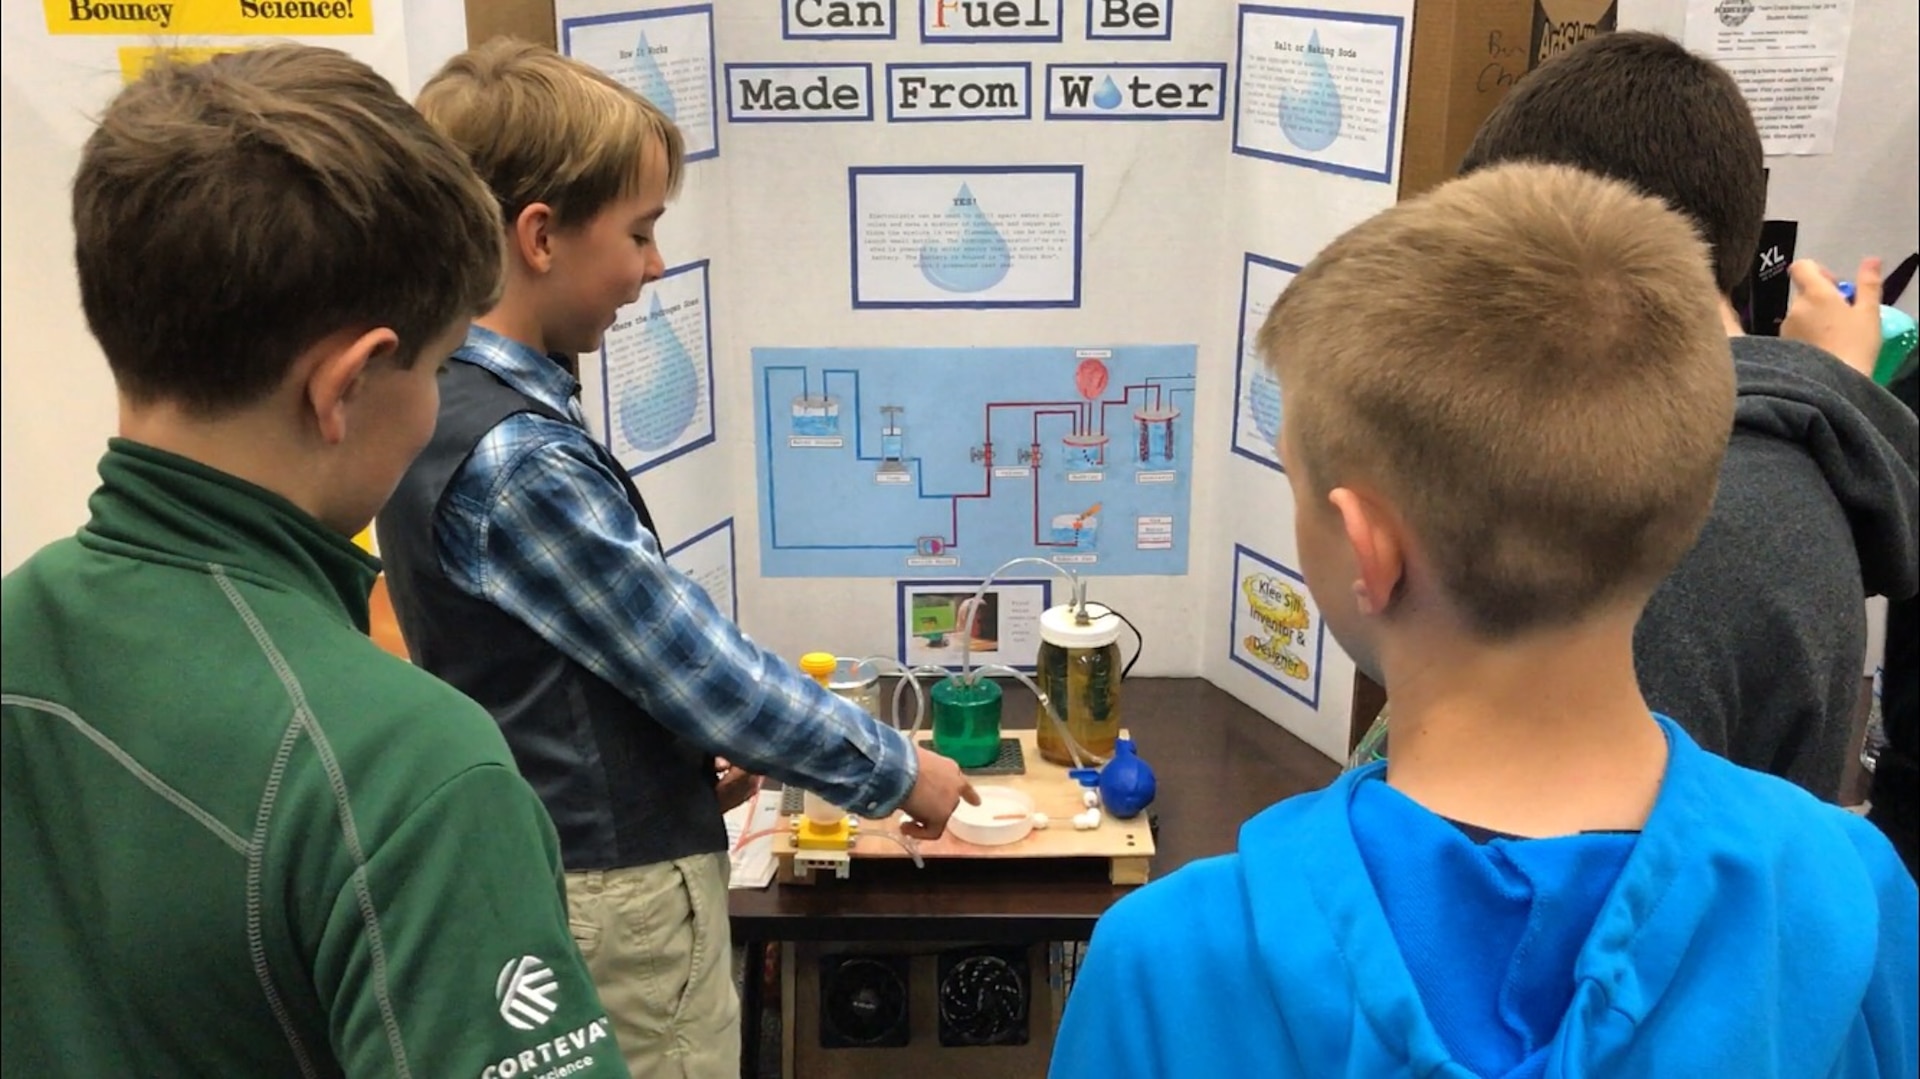 CRANE, Ind. – Naval Surface Warfare Center, Crane Division (NSWC Crane) Science, Technology, Engineering, and Math (STEM) Department hosted a youth science fair at WestGate Academy on April 4, 2019.